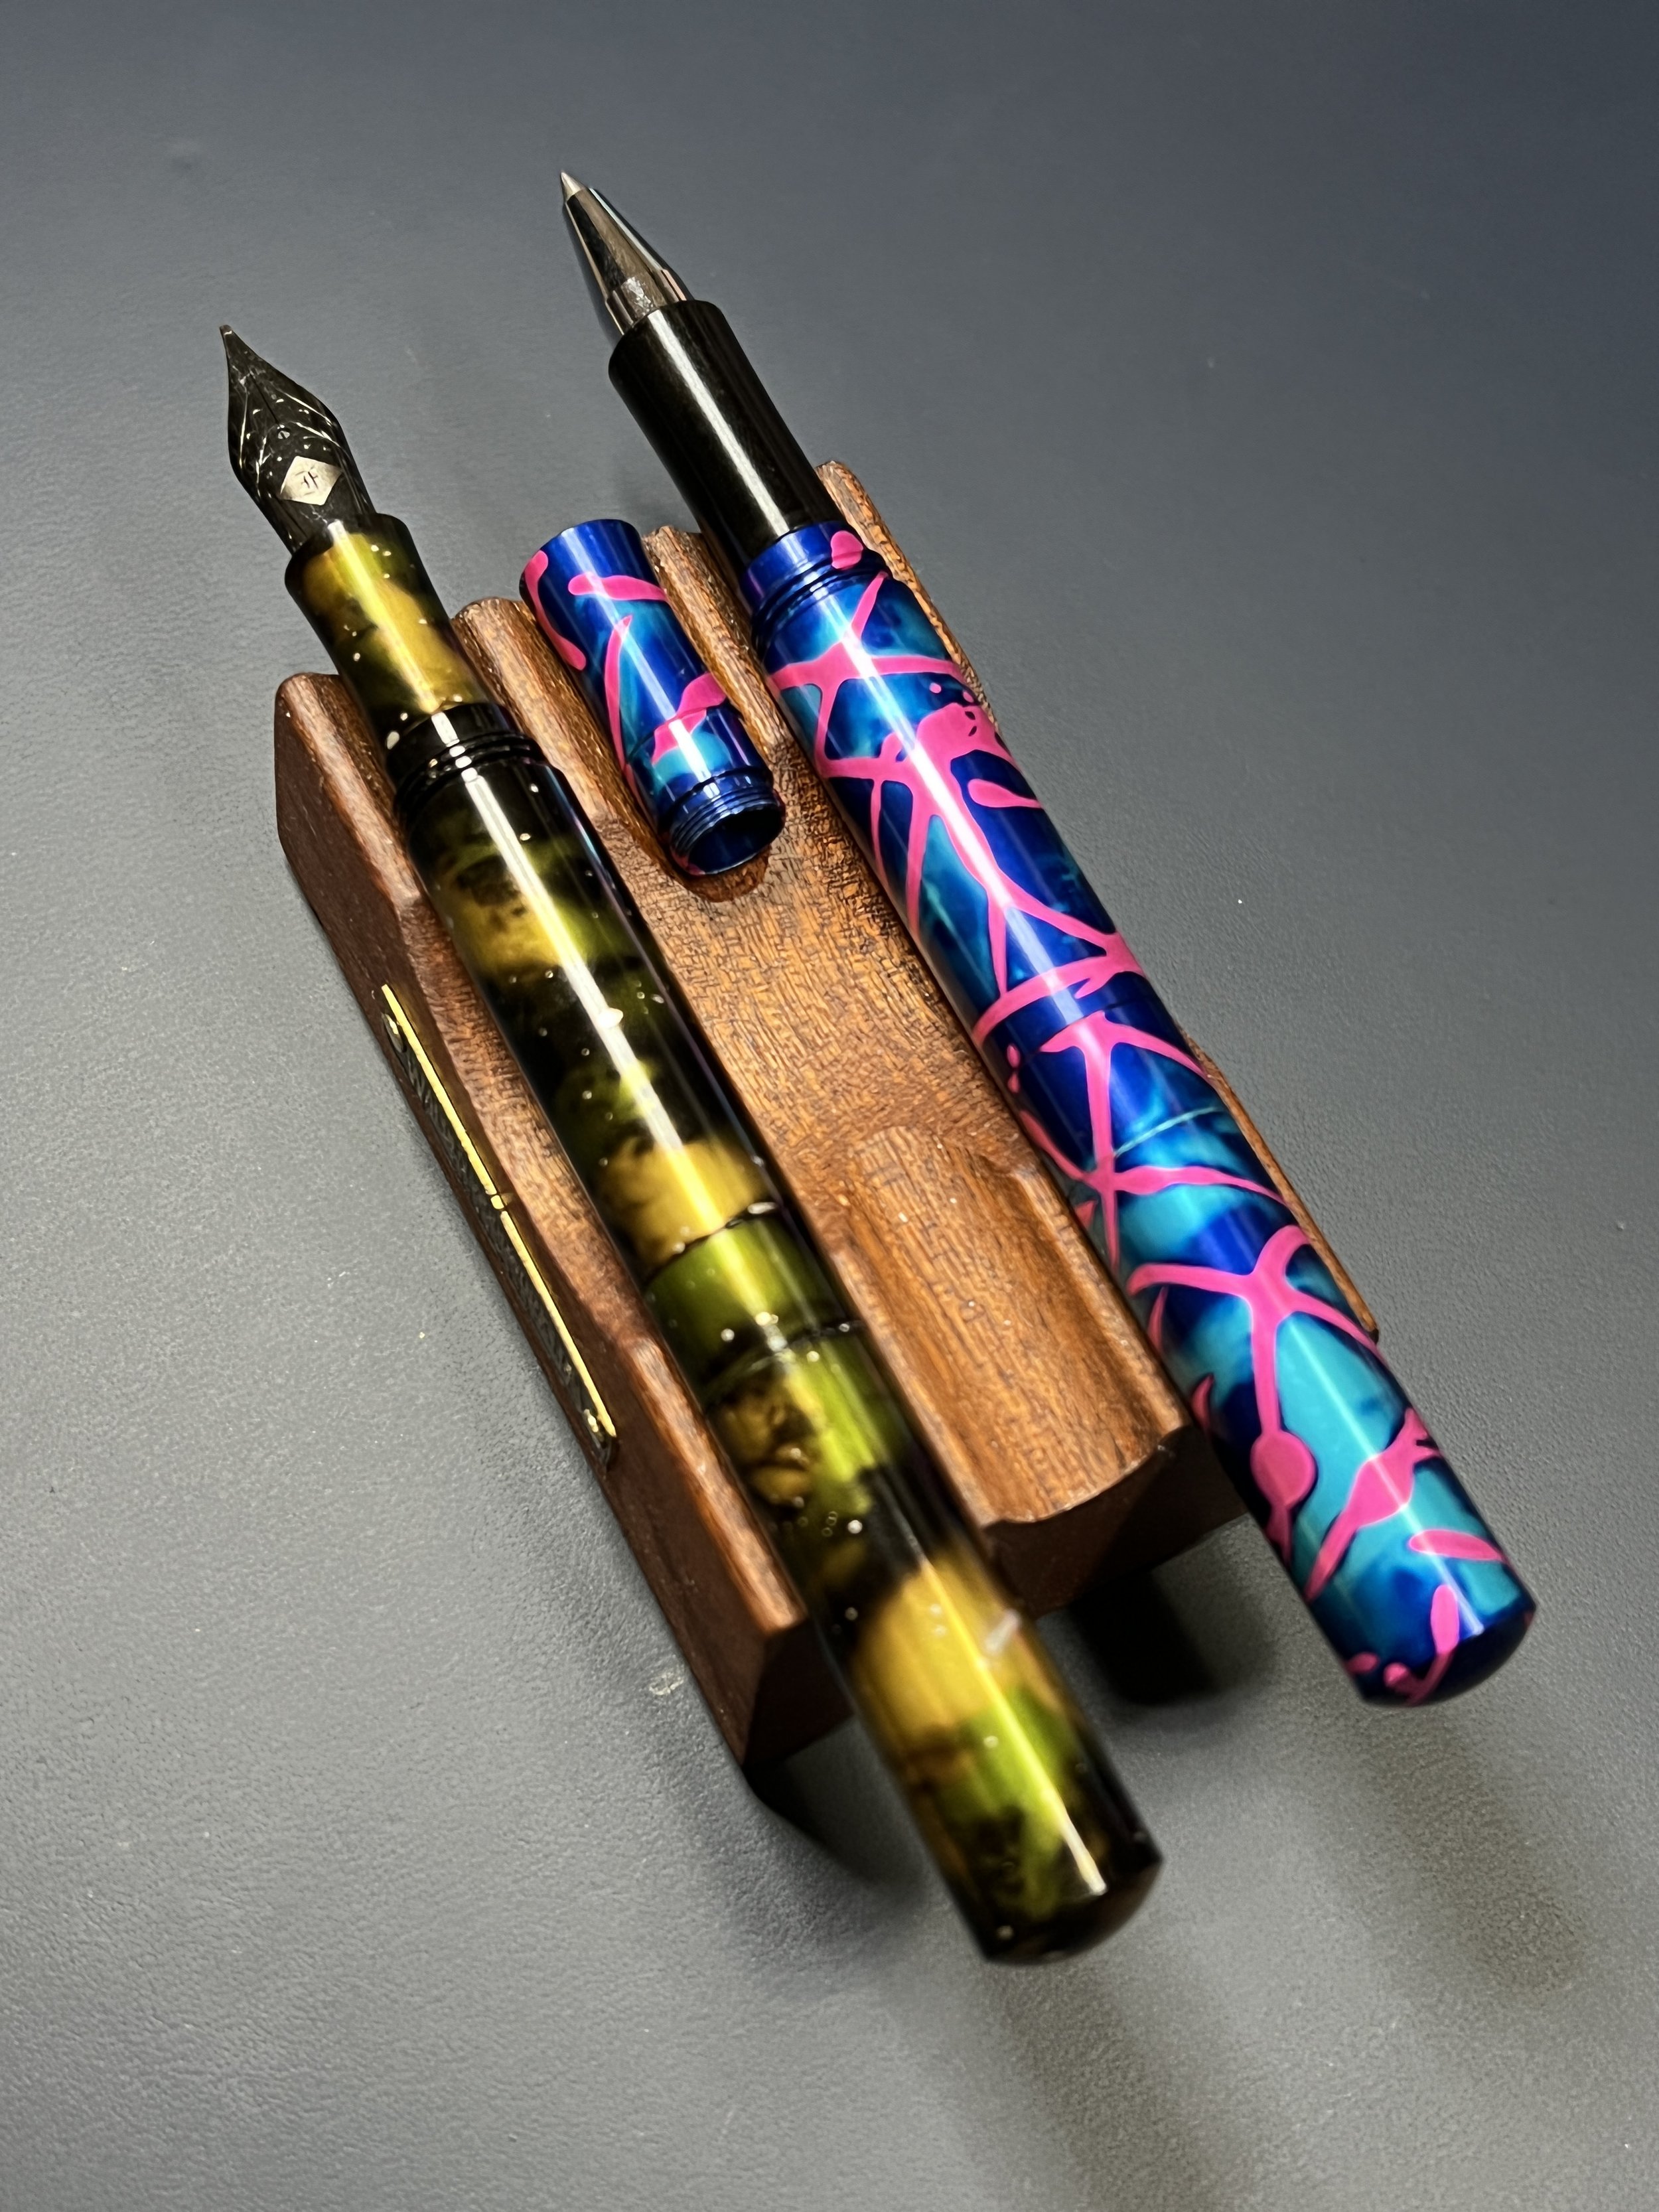 Pocket Size Fountain Pens for Journaling – My two favourites